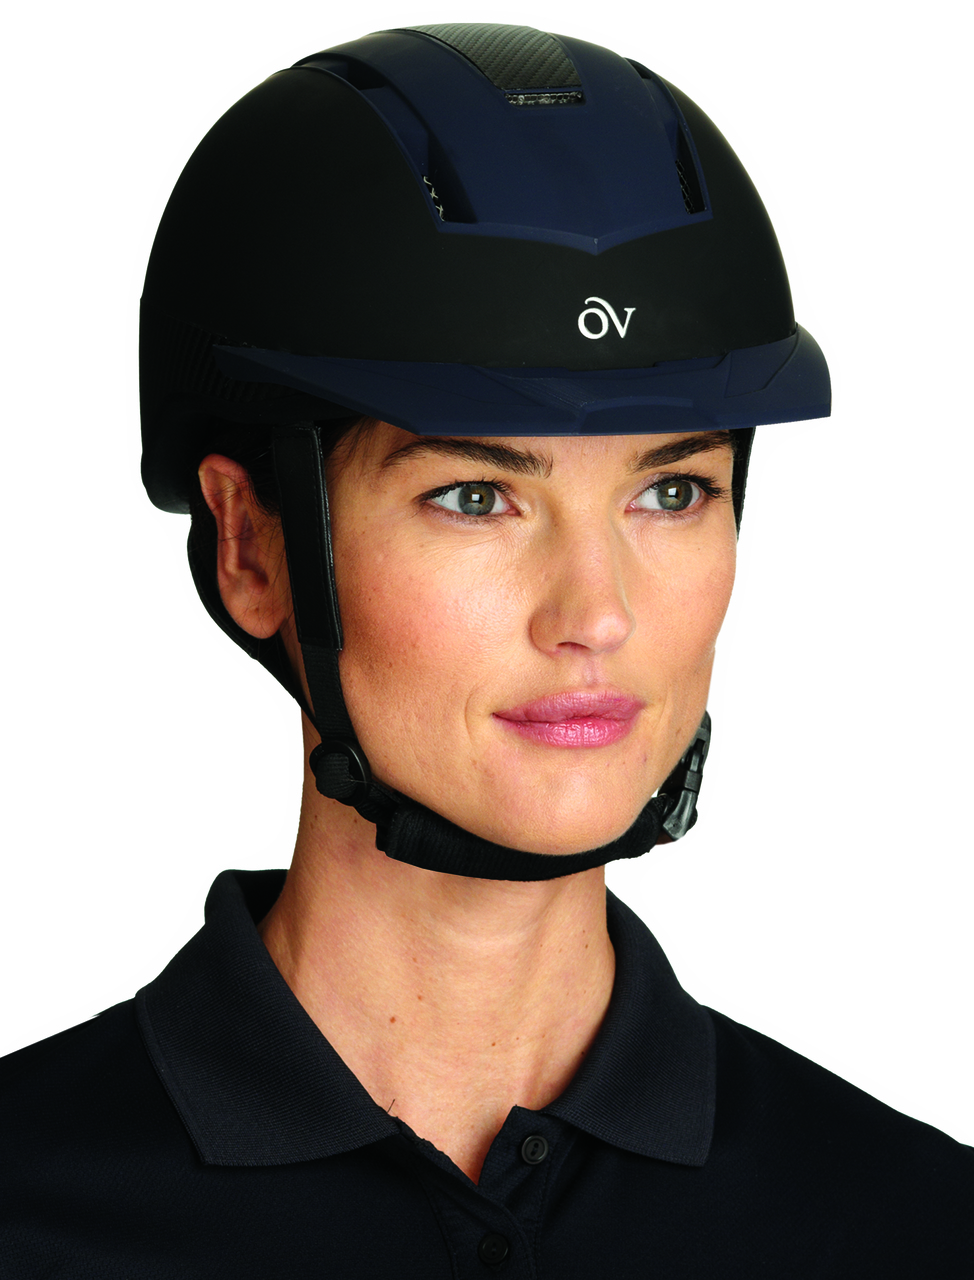 Ovation Replacement Spare Helmet Visor For Extreme Riding Helmets 